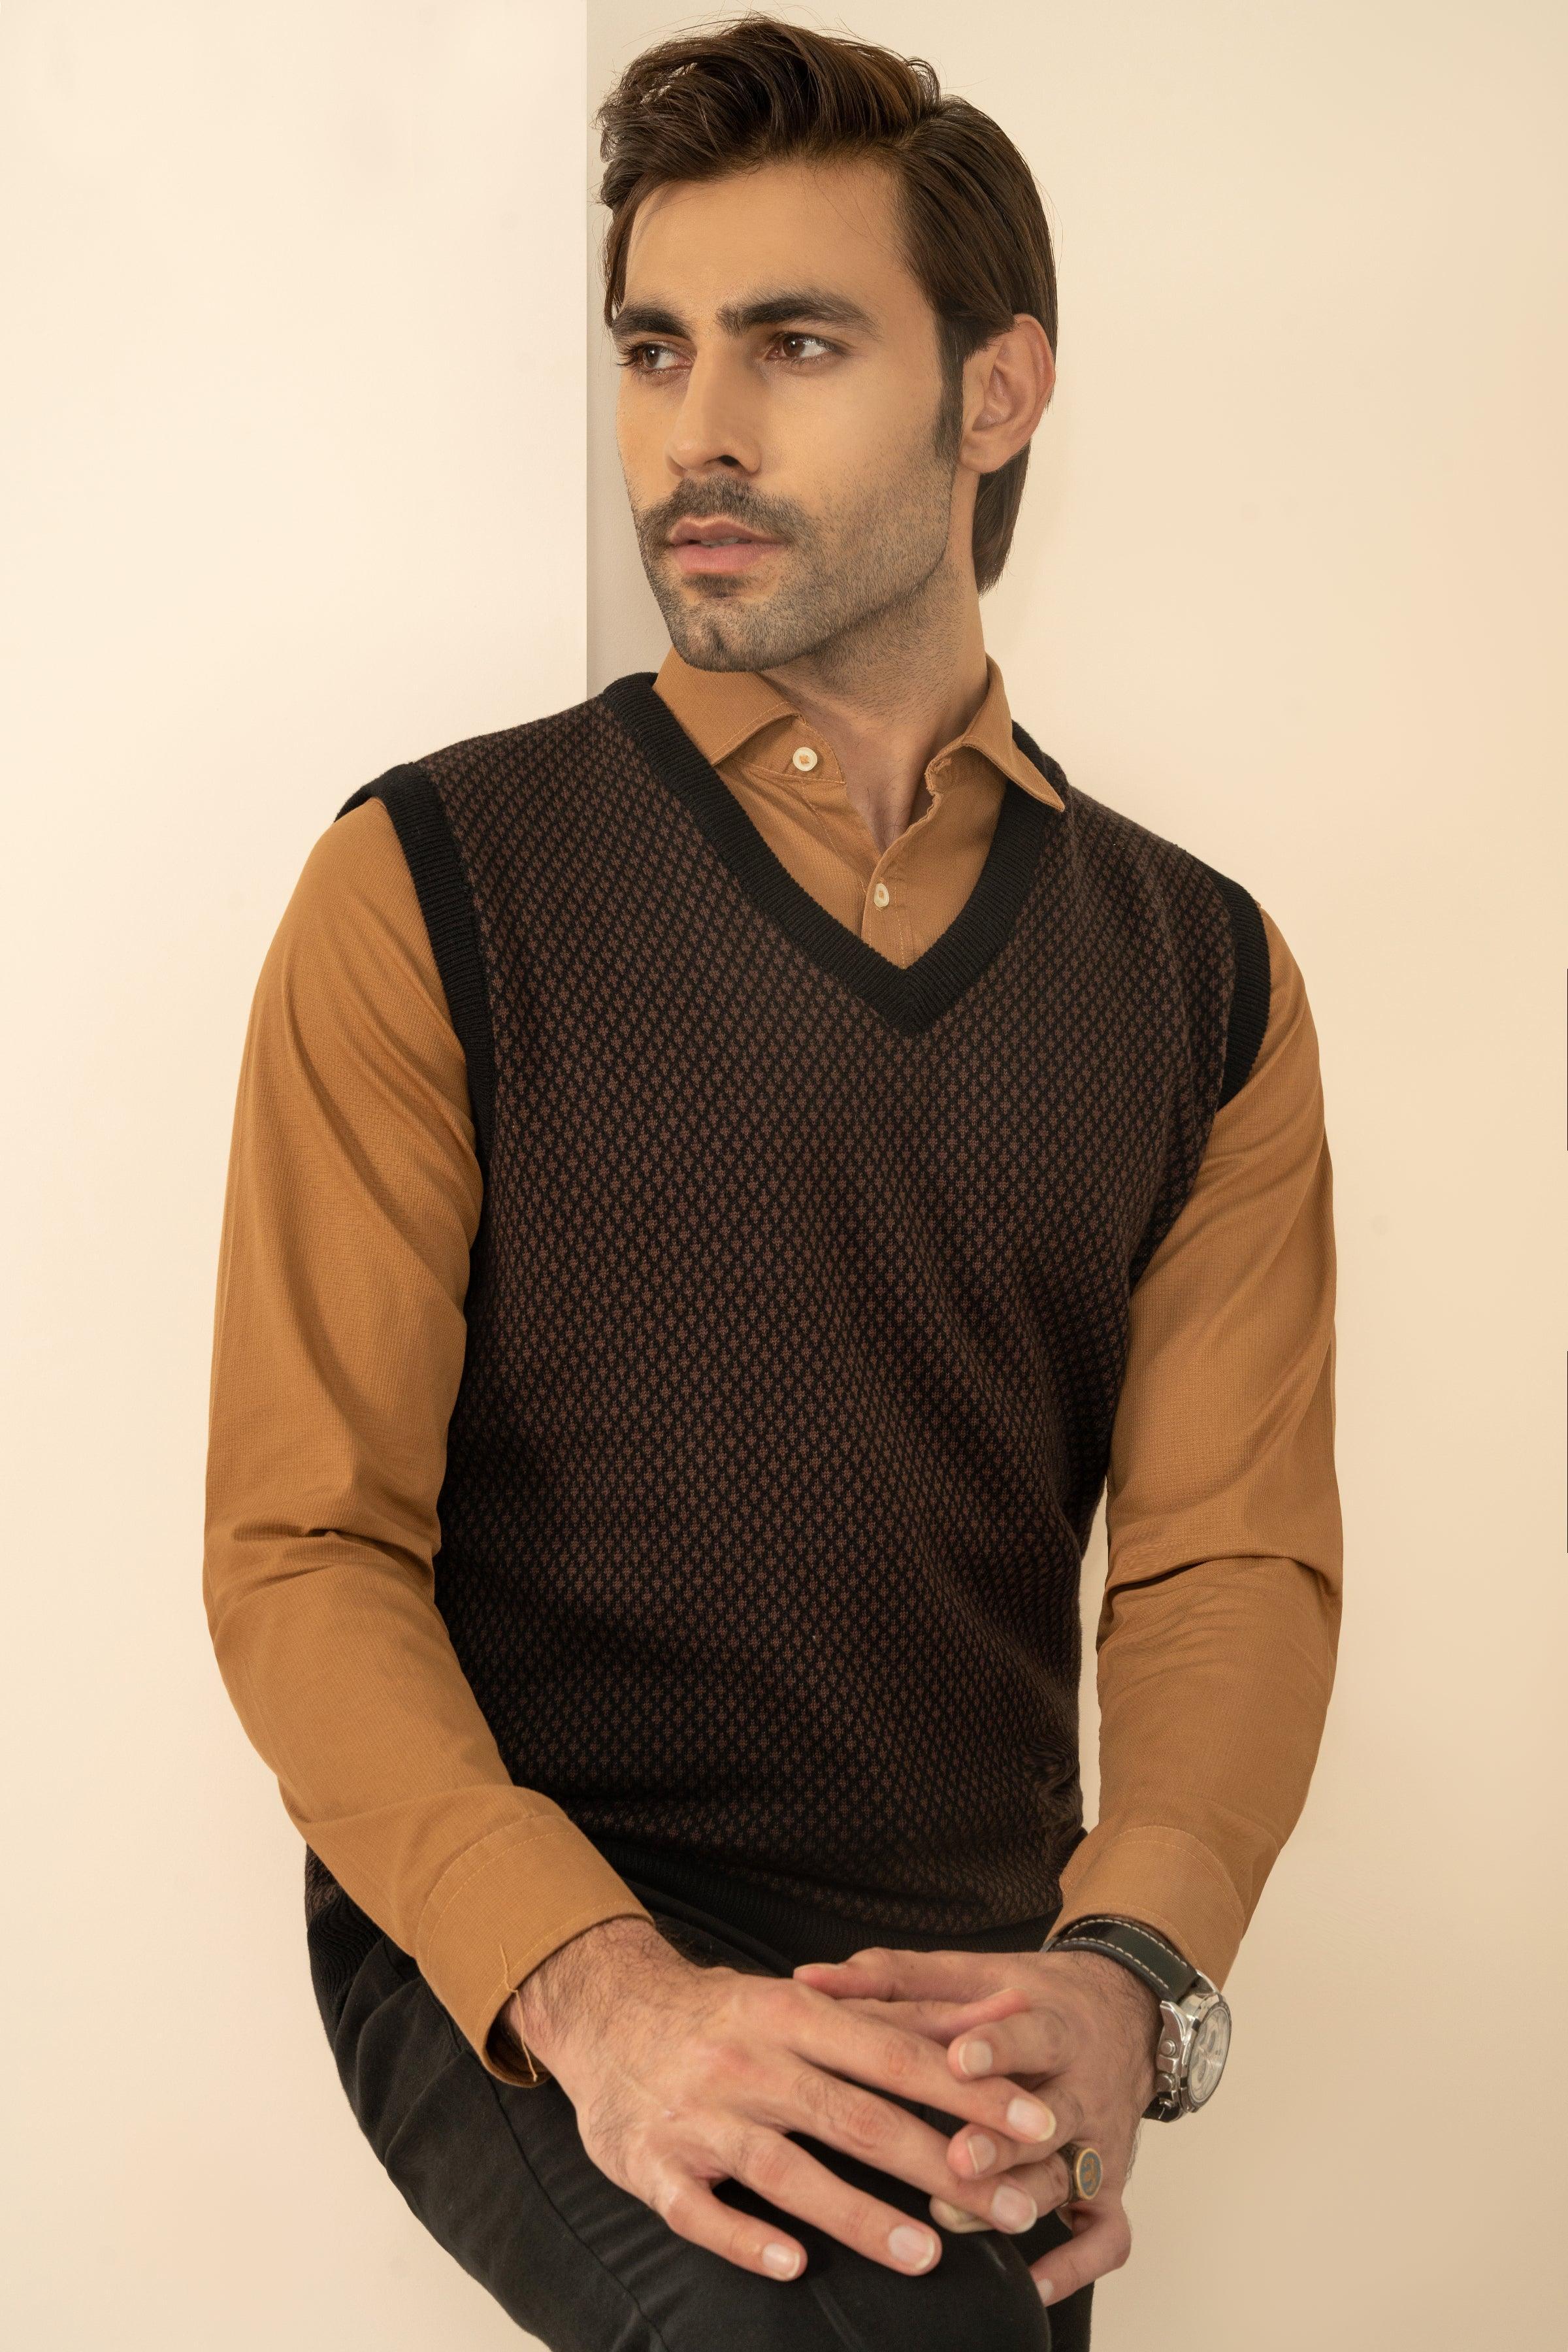 SLEEVELESS SWEATER BLACK BROWN at Charcoal Clothing